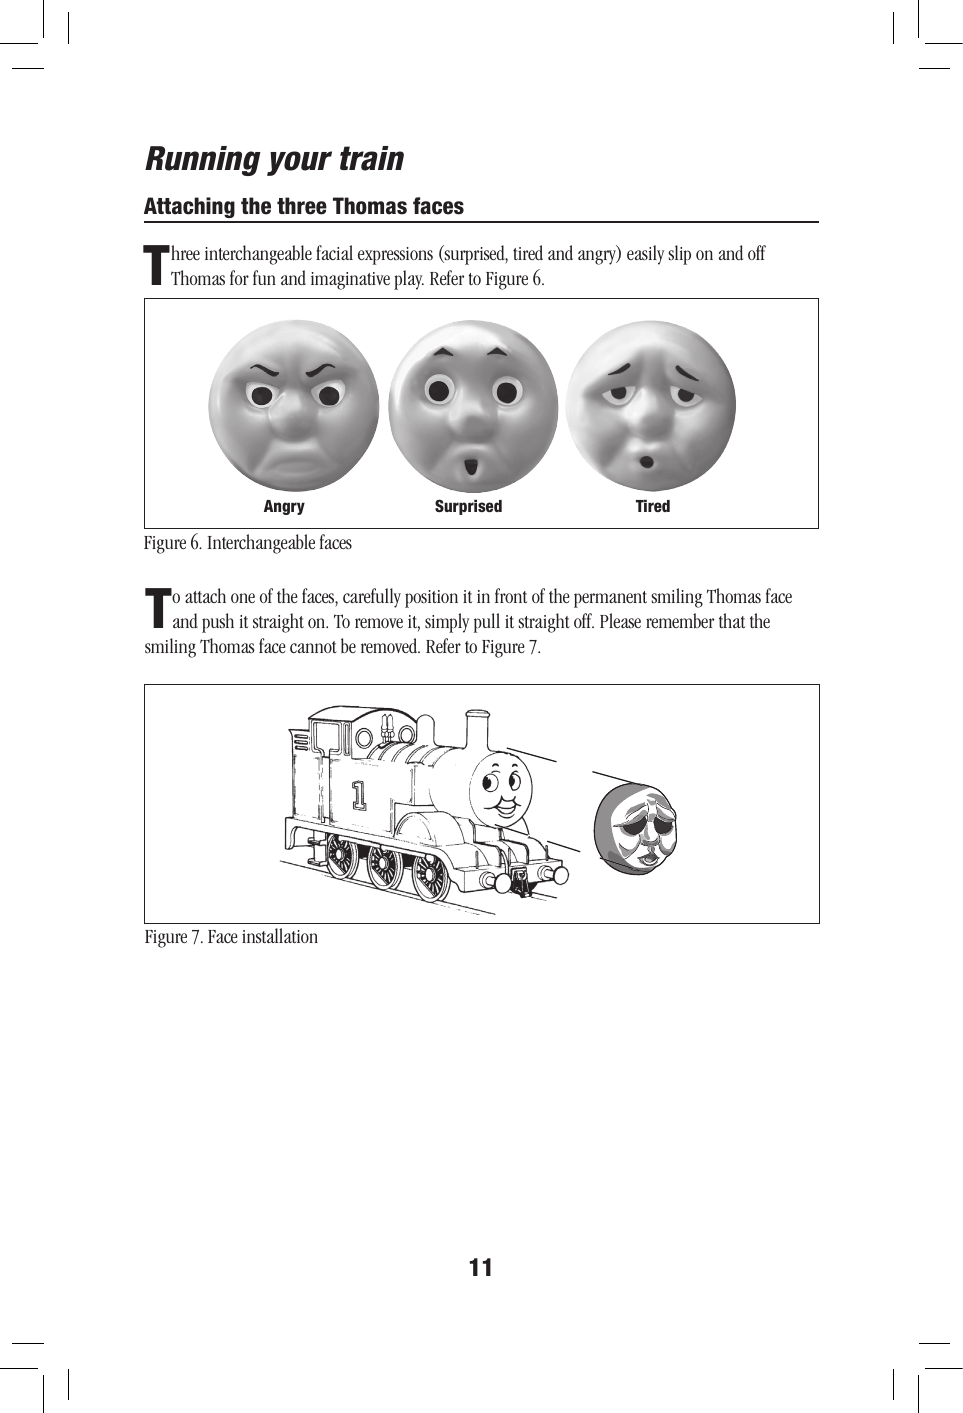 11Attaching the three Thomas facesThree interchangeable facial expressions (surprised, tired and angry) easily slip on and off Thomas for fun and imaginative play. Refer to Figure 6.Figure 6. Interchangeable facesRunning your trainTo attach one of the faces, carefully position it in front of the permanent smiling Thomas face and push it straight on. To remove it, simply pull it straight off. Please remember that the smiling Thomas face cannot be removed. Refer to Figure 7.Figure 7. Face installationAngry Surprised Tired